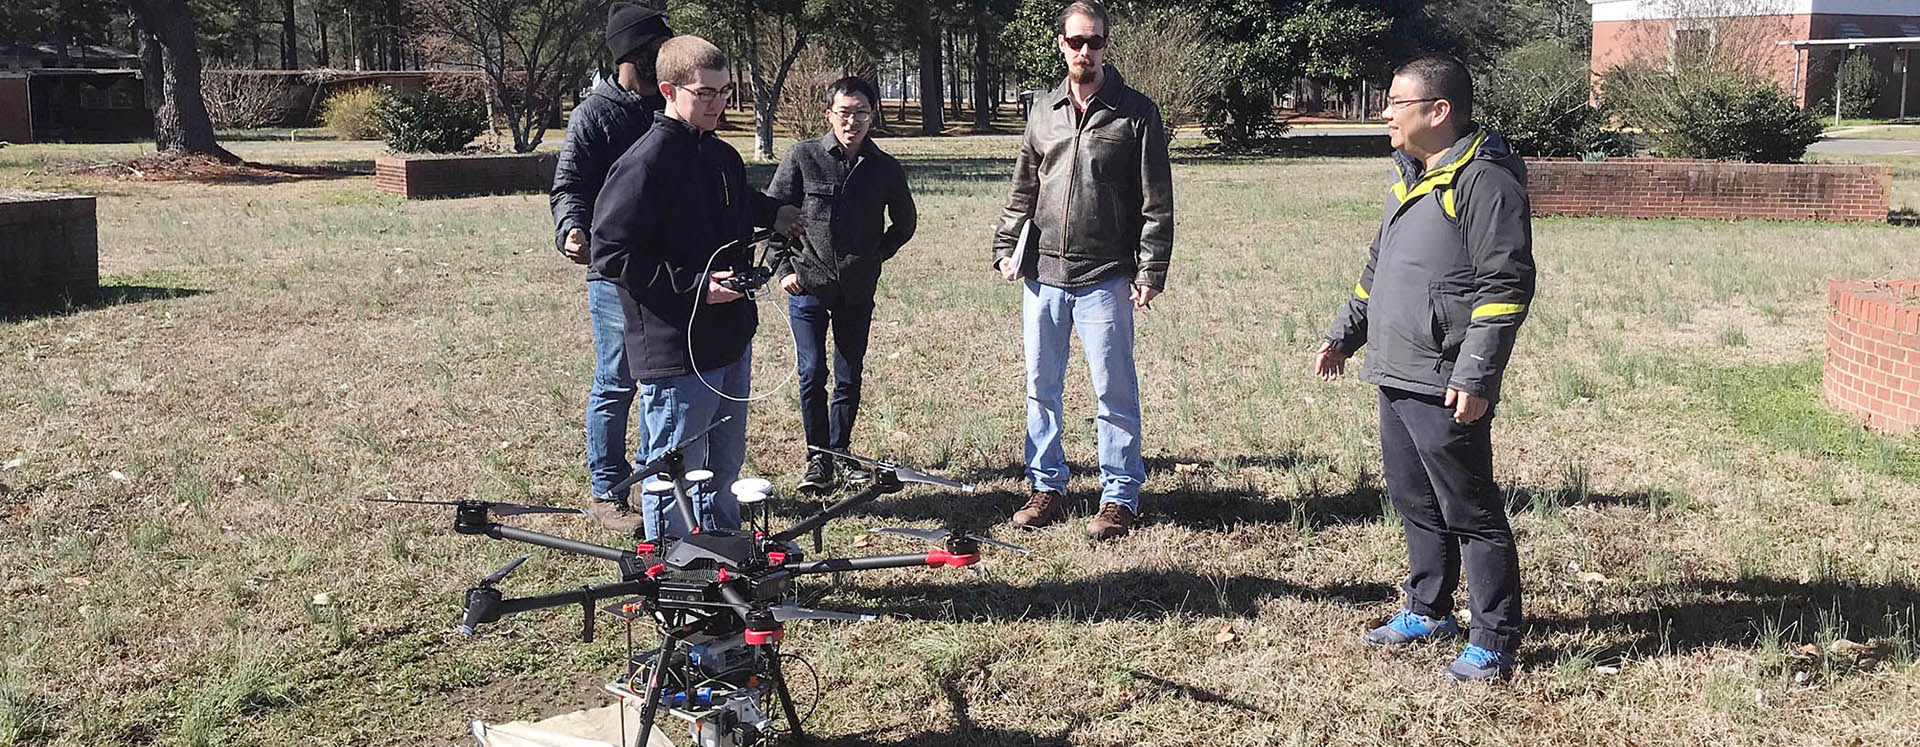 Dr. Zhen Zhu, right, associate professor in the Department of Engineering, works on research exploring advanced applications of UAVs for the Department of Transportation. (Contributed photo)